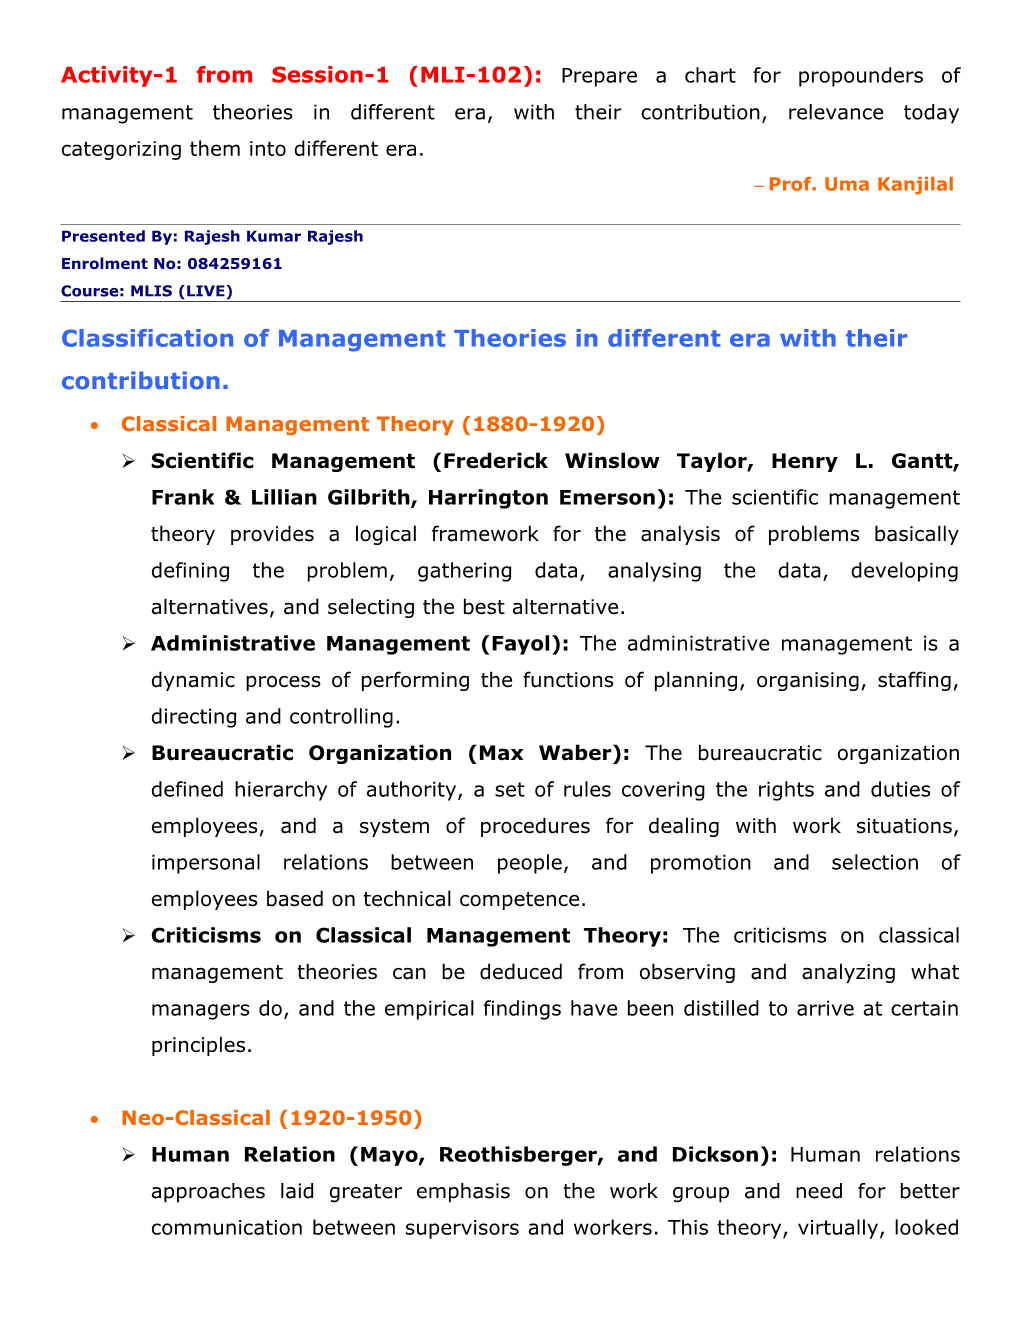 Classification of Management Theories